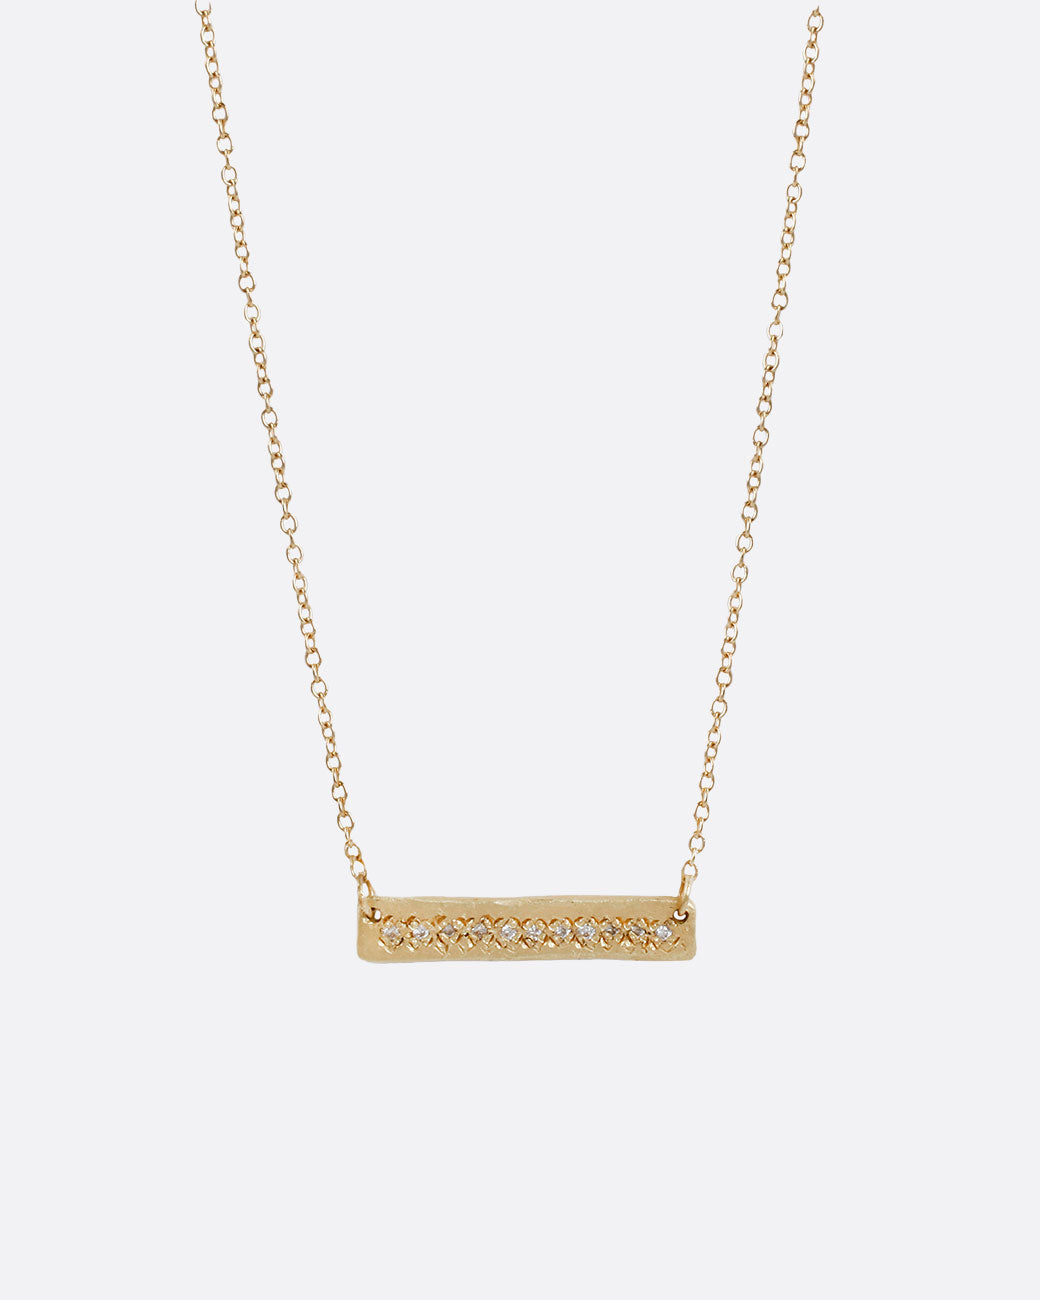 A yellow gold bar necklace with a single row of white diamonds.